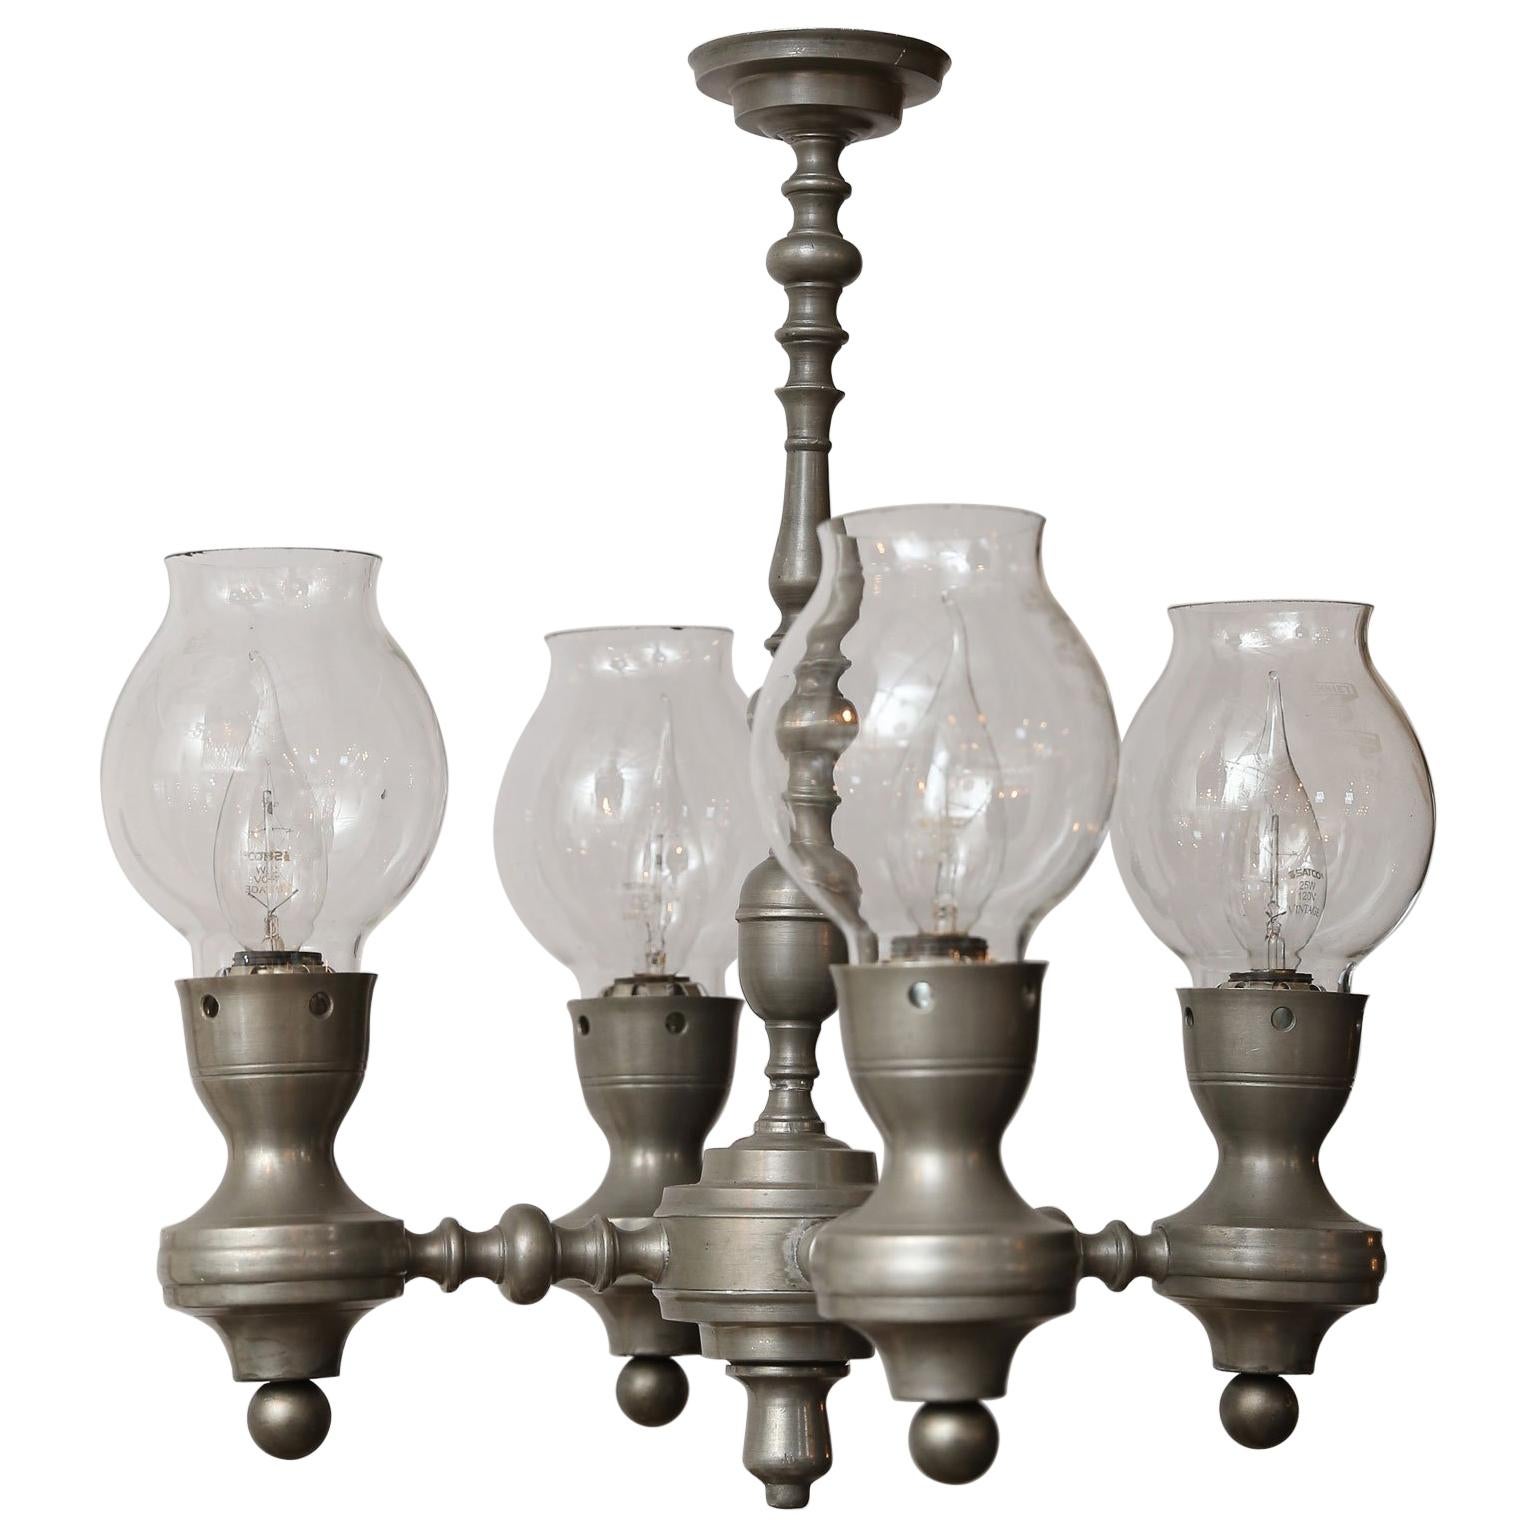 Unusual Pewter Chandelier with Glass hurricanes in Country Style.